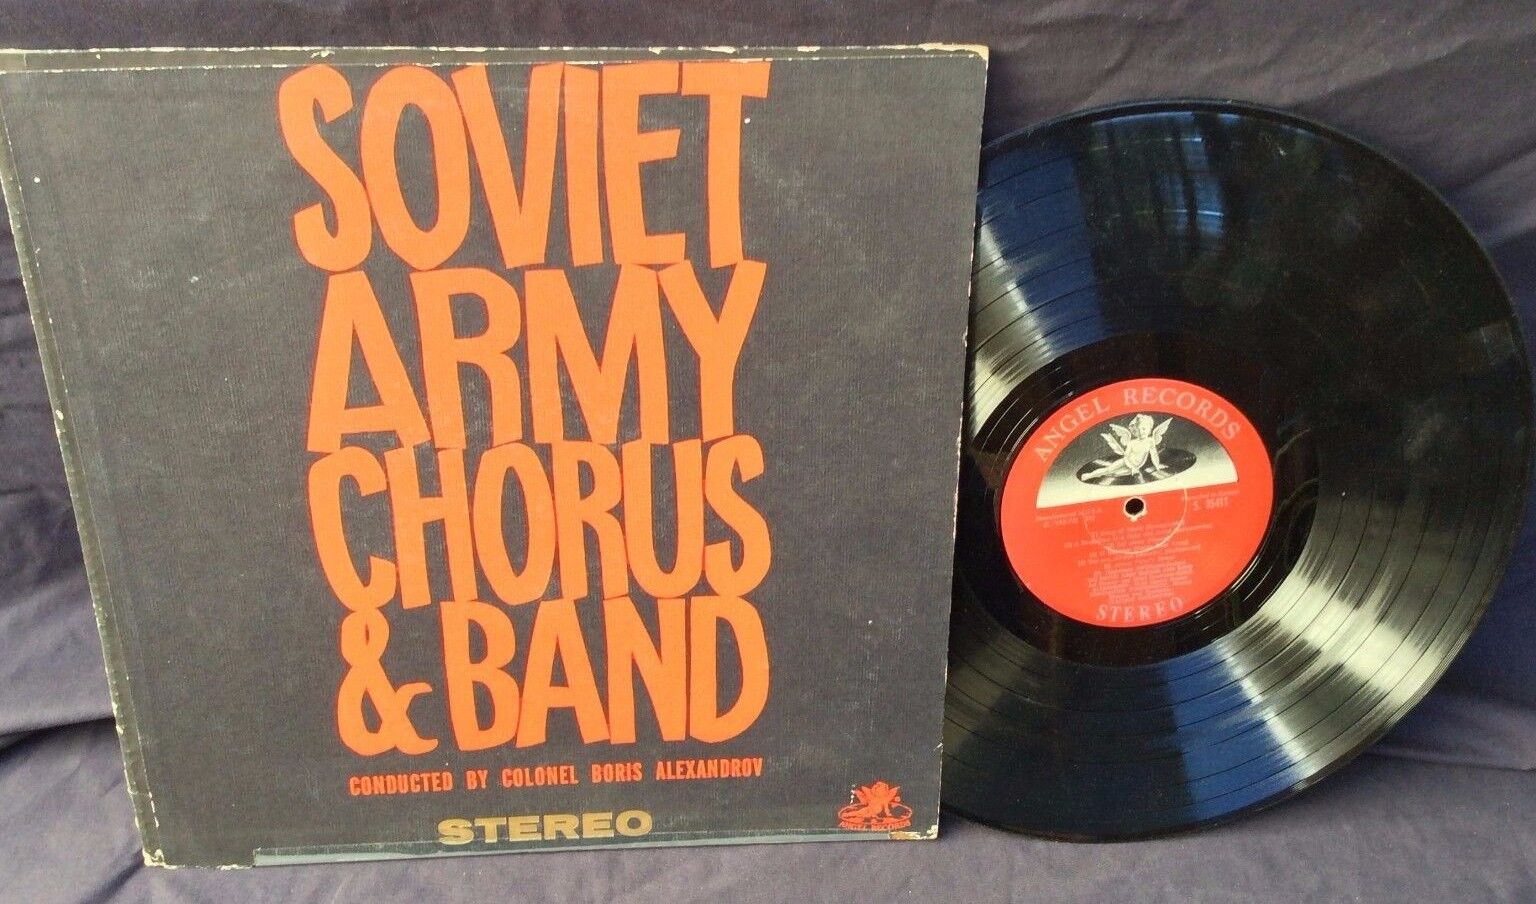 SOVIET ARMY CHORUS /BAND - Records S 35411 Stereo Russia   